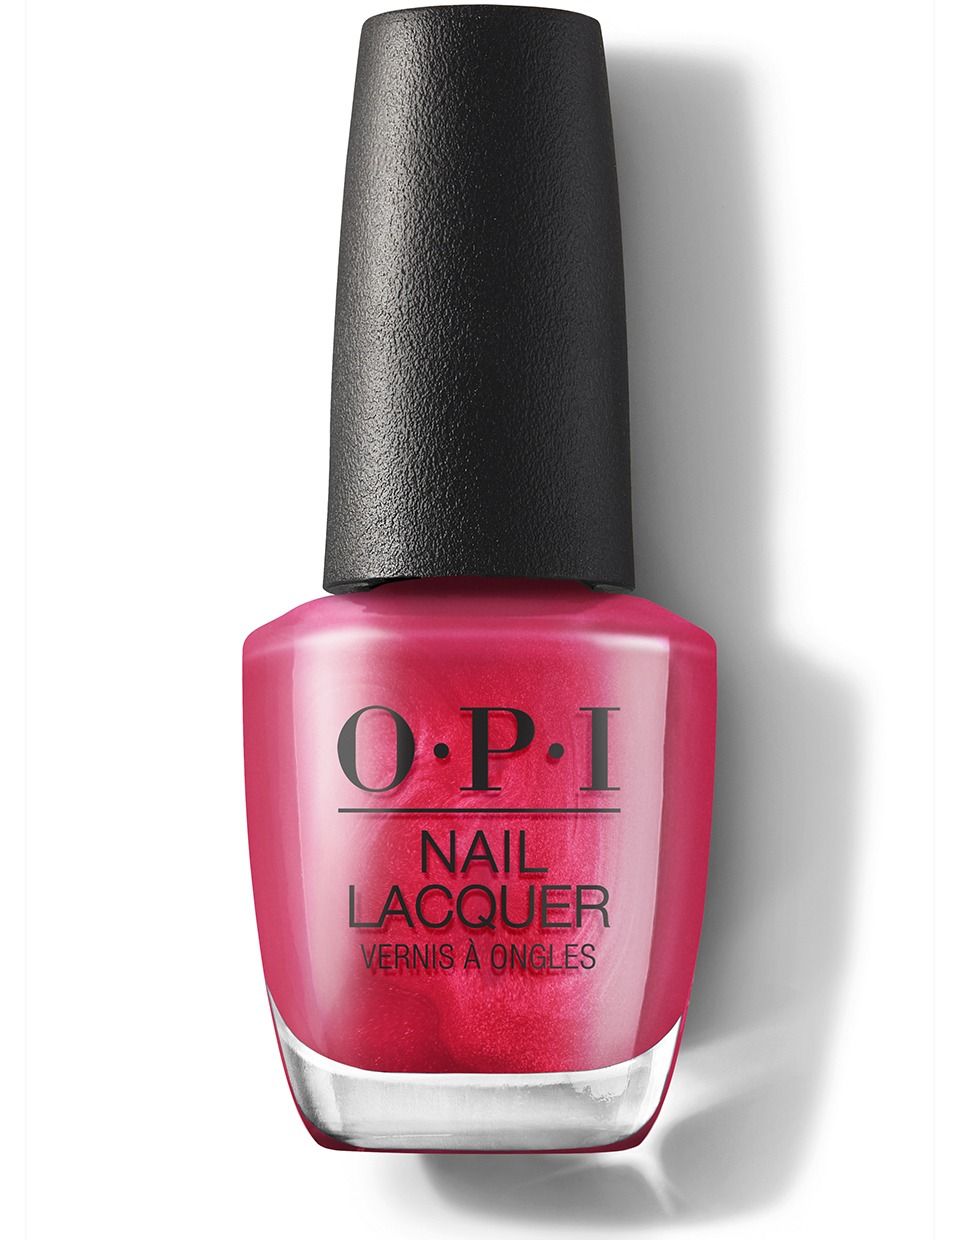 viva magenta mau sac 2023 OPI Nail Lacquer in 15 Minutes of Flame ebce20d345